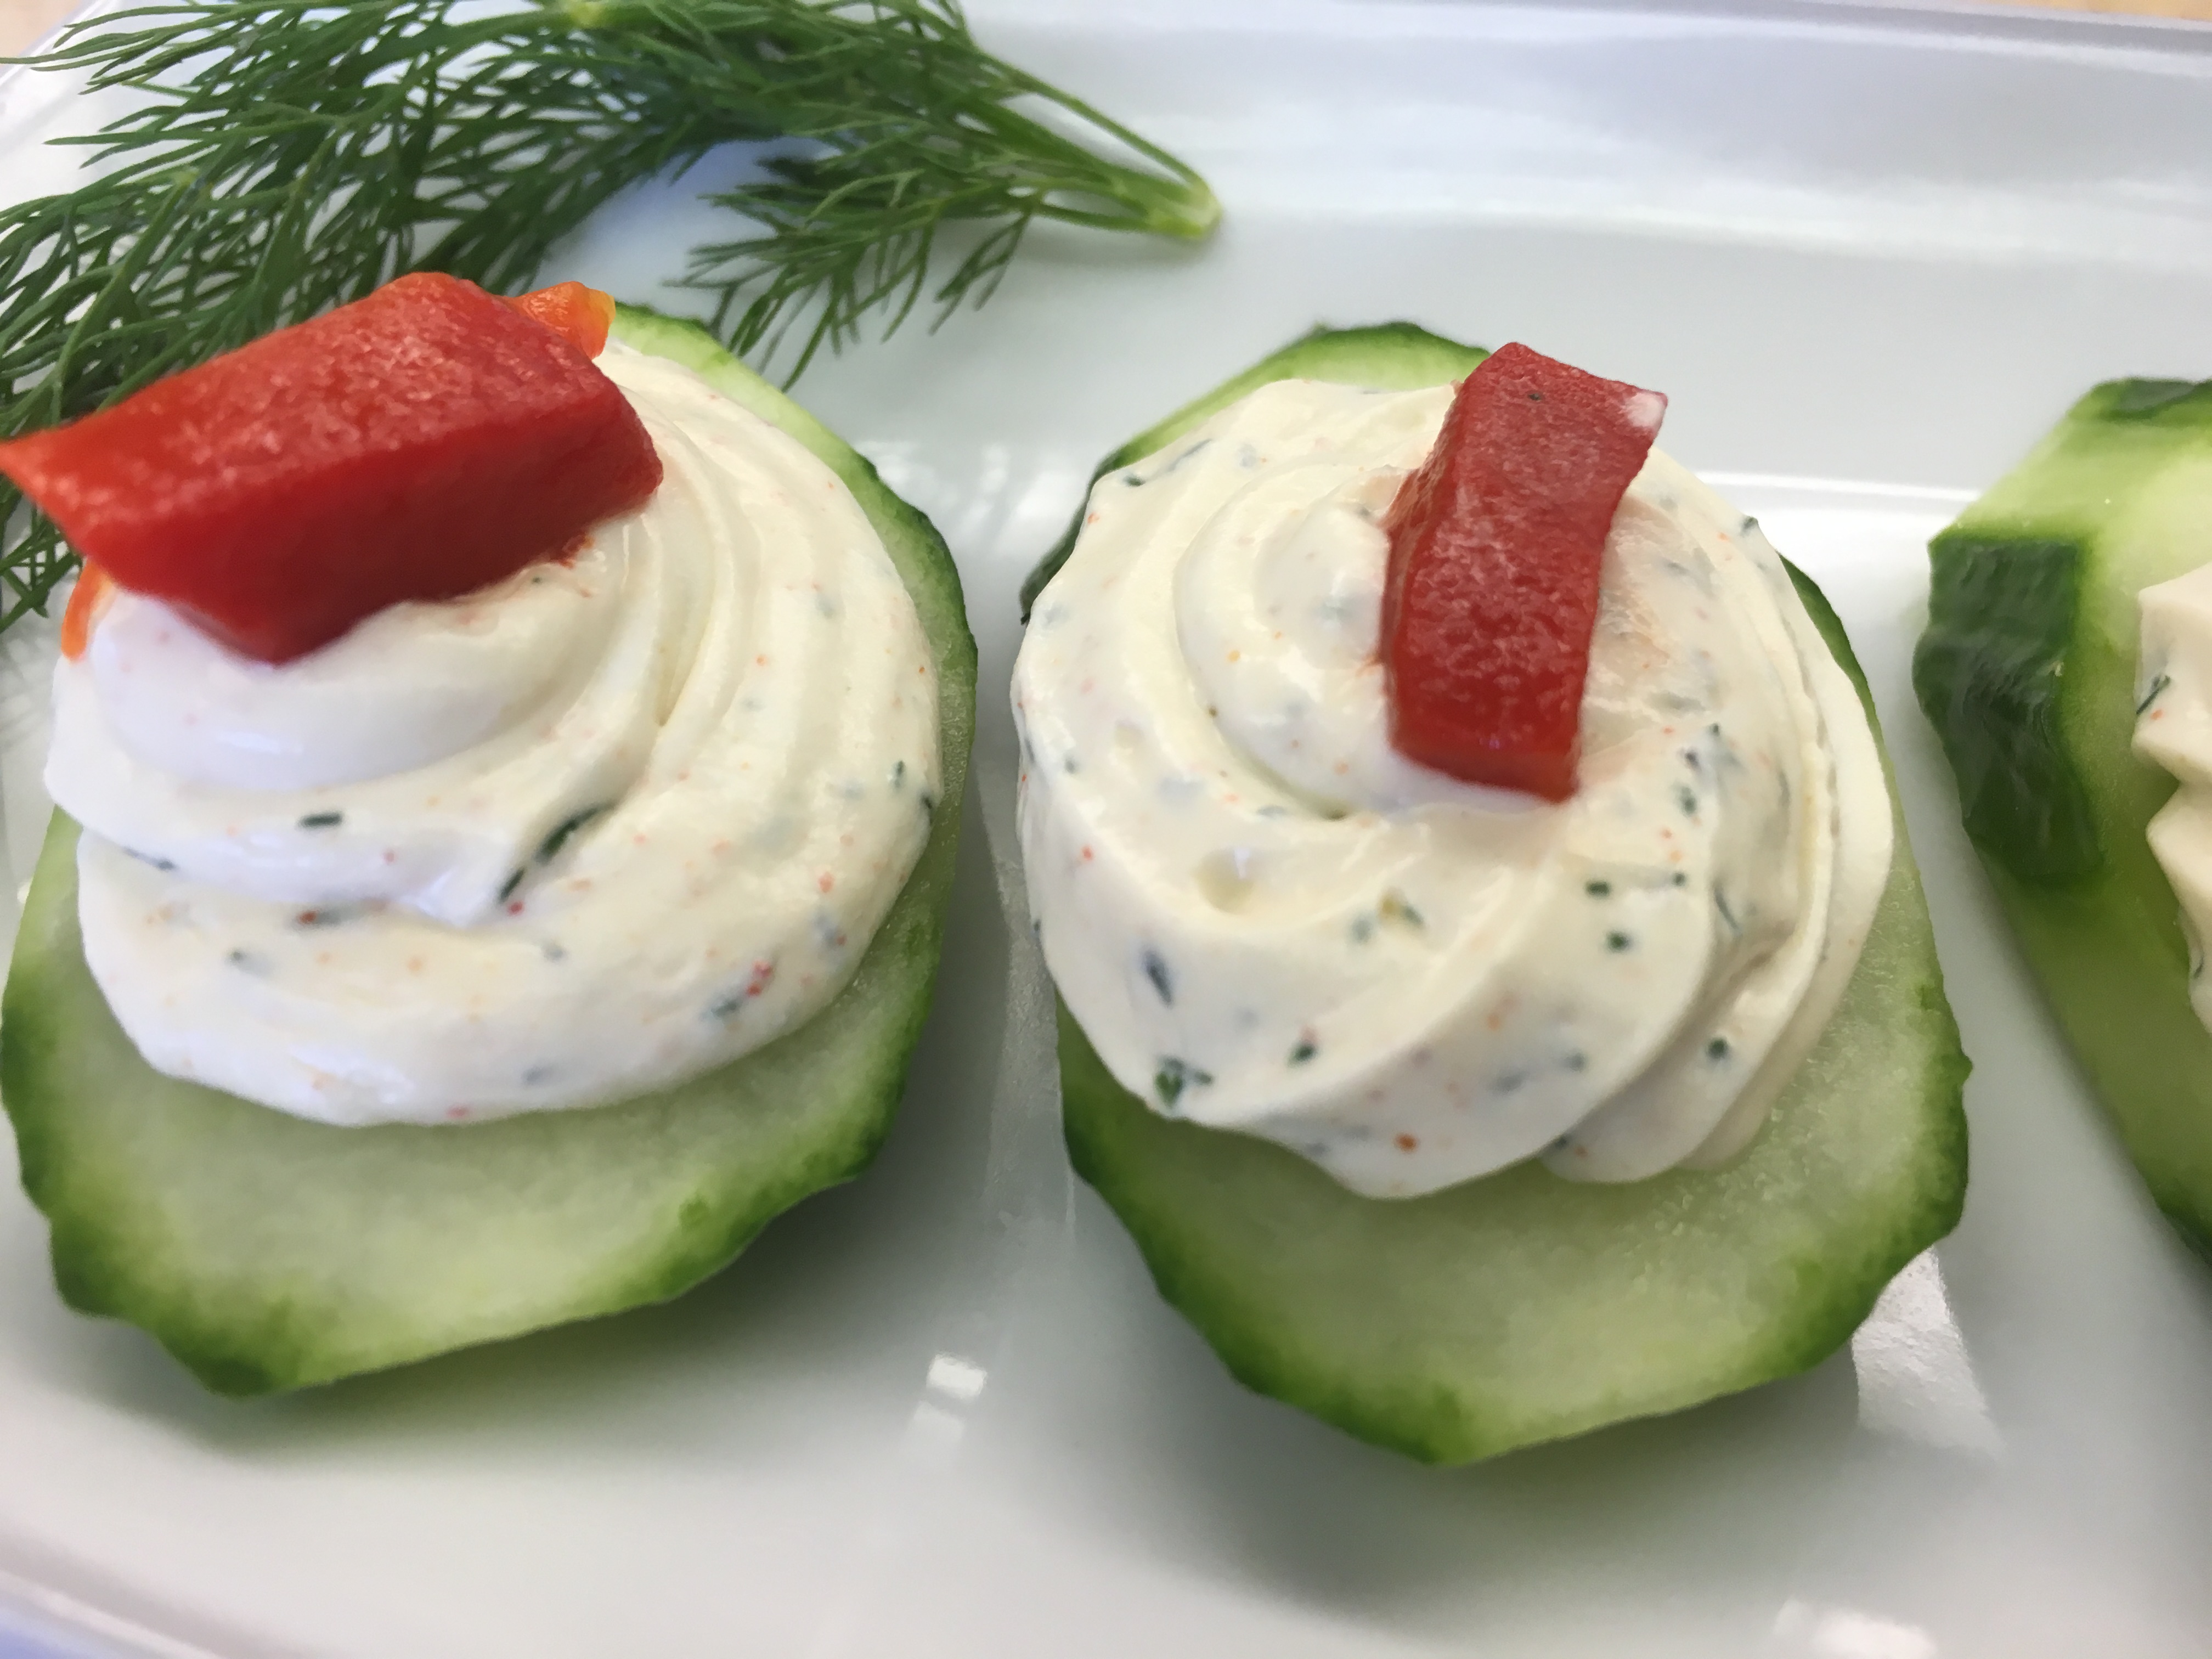 Healthy, tasty, quick & adorable. This cucumber recipe is a quadruple threat & will quickly become your go to appetizer for any party!